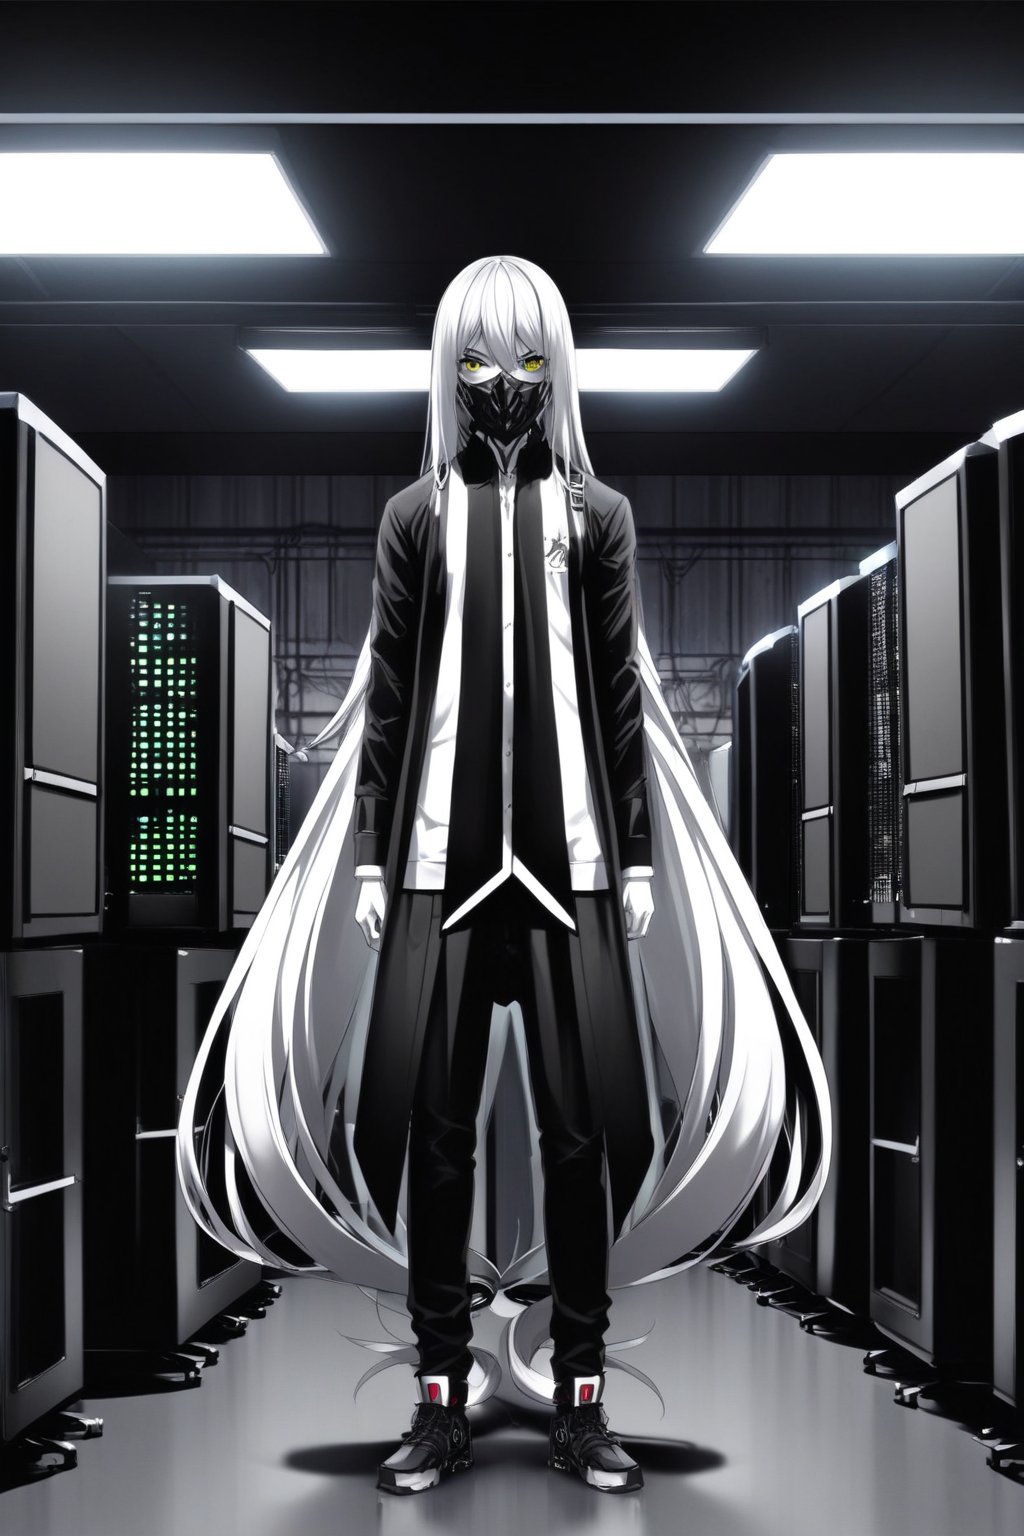 16 year old boy, white hair, very long hair, with a black face mask that covers the entire face, the entire face covered, long black robe down to the feet, dark background, and white shirt, looking at the viewer, full body 1 ,40 meters, dark room, and behind some computers with a dark background.,yuu_ishigami